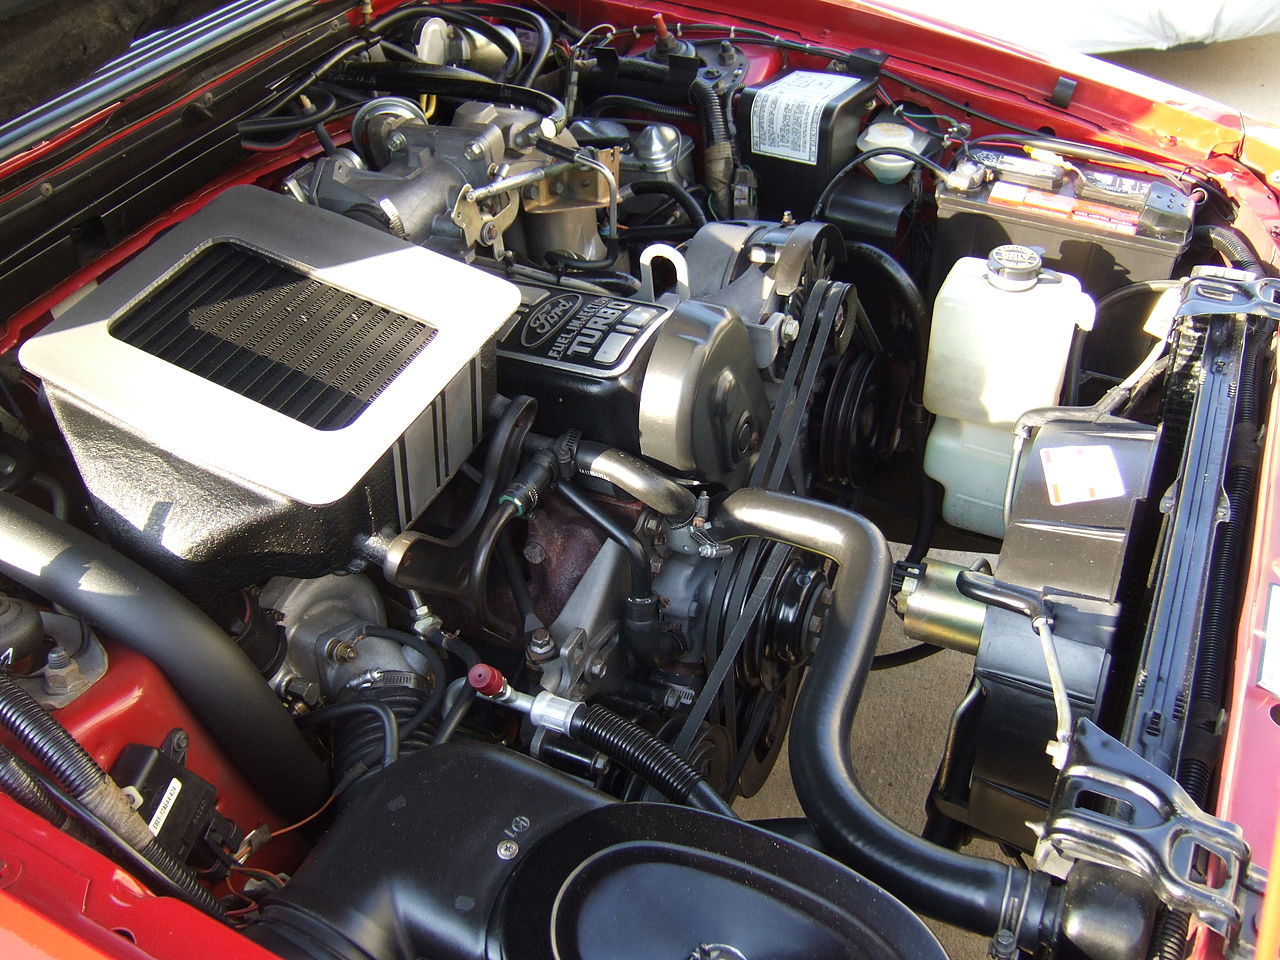 File:86 SVO engine 2.3L Turbo.JPG - Wikimedia Commons 78 ford pinto wiring diagram 